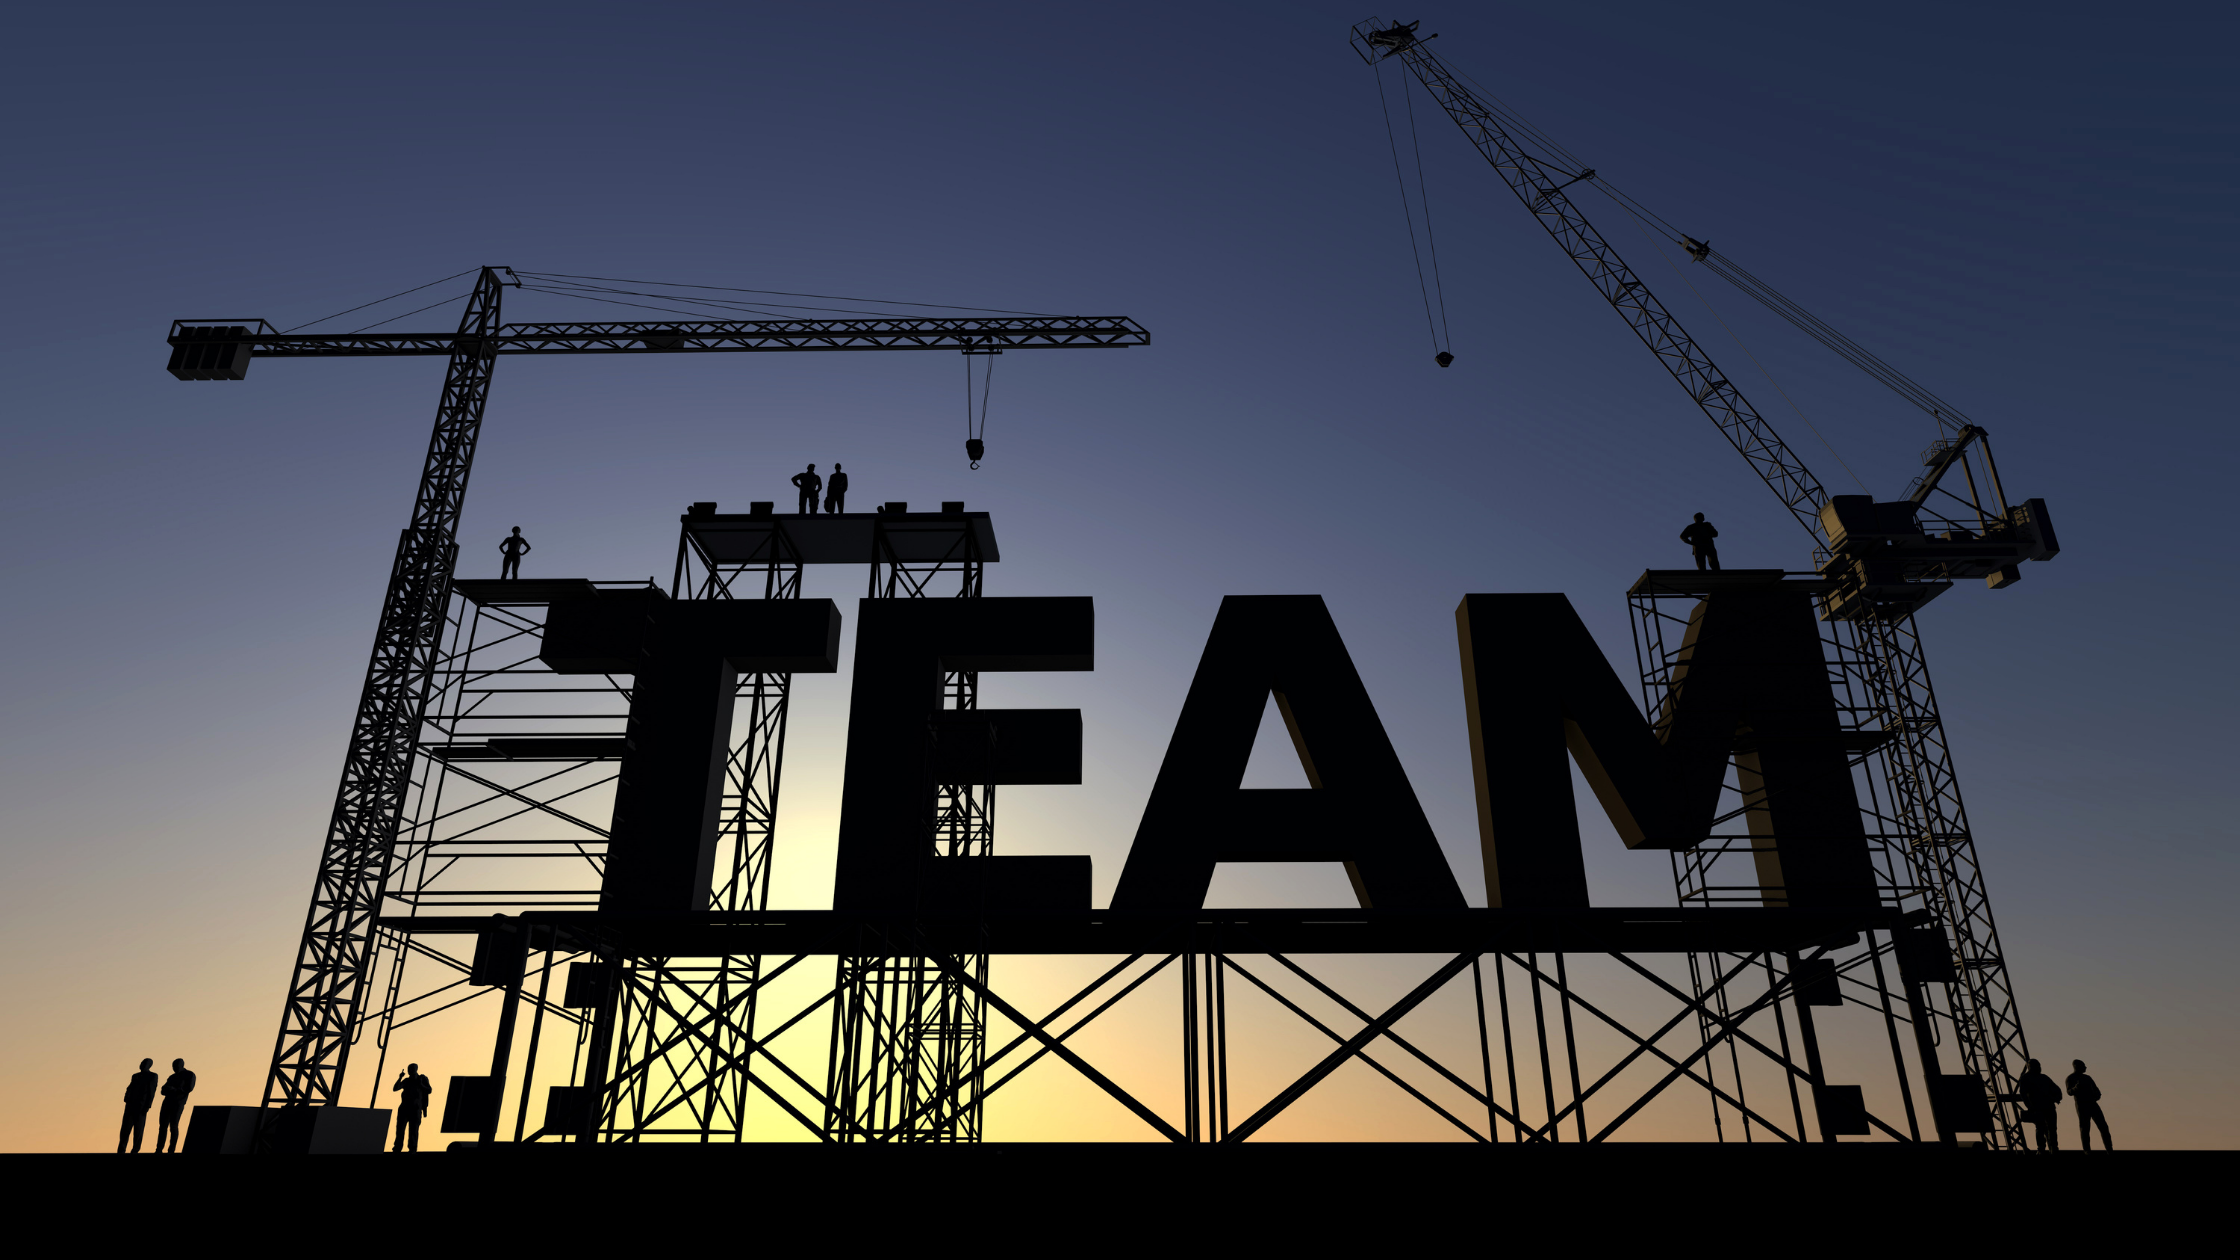 How to Build a Data Science Team | Image of the word "TEAM" being formed at a construction site.